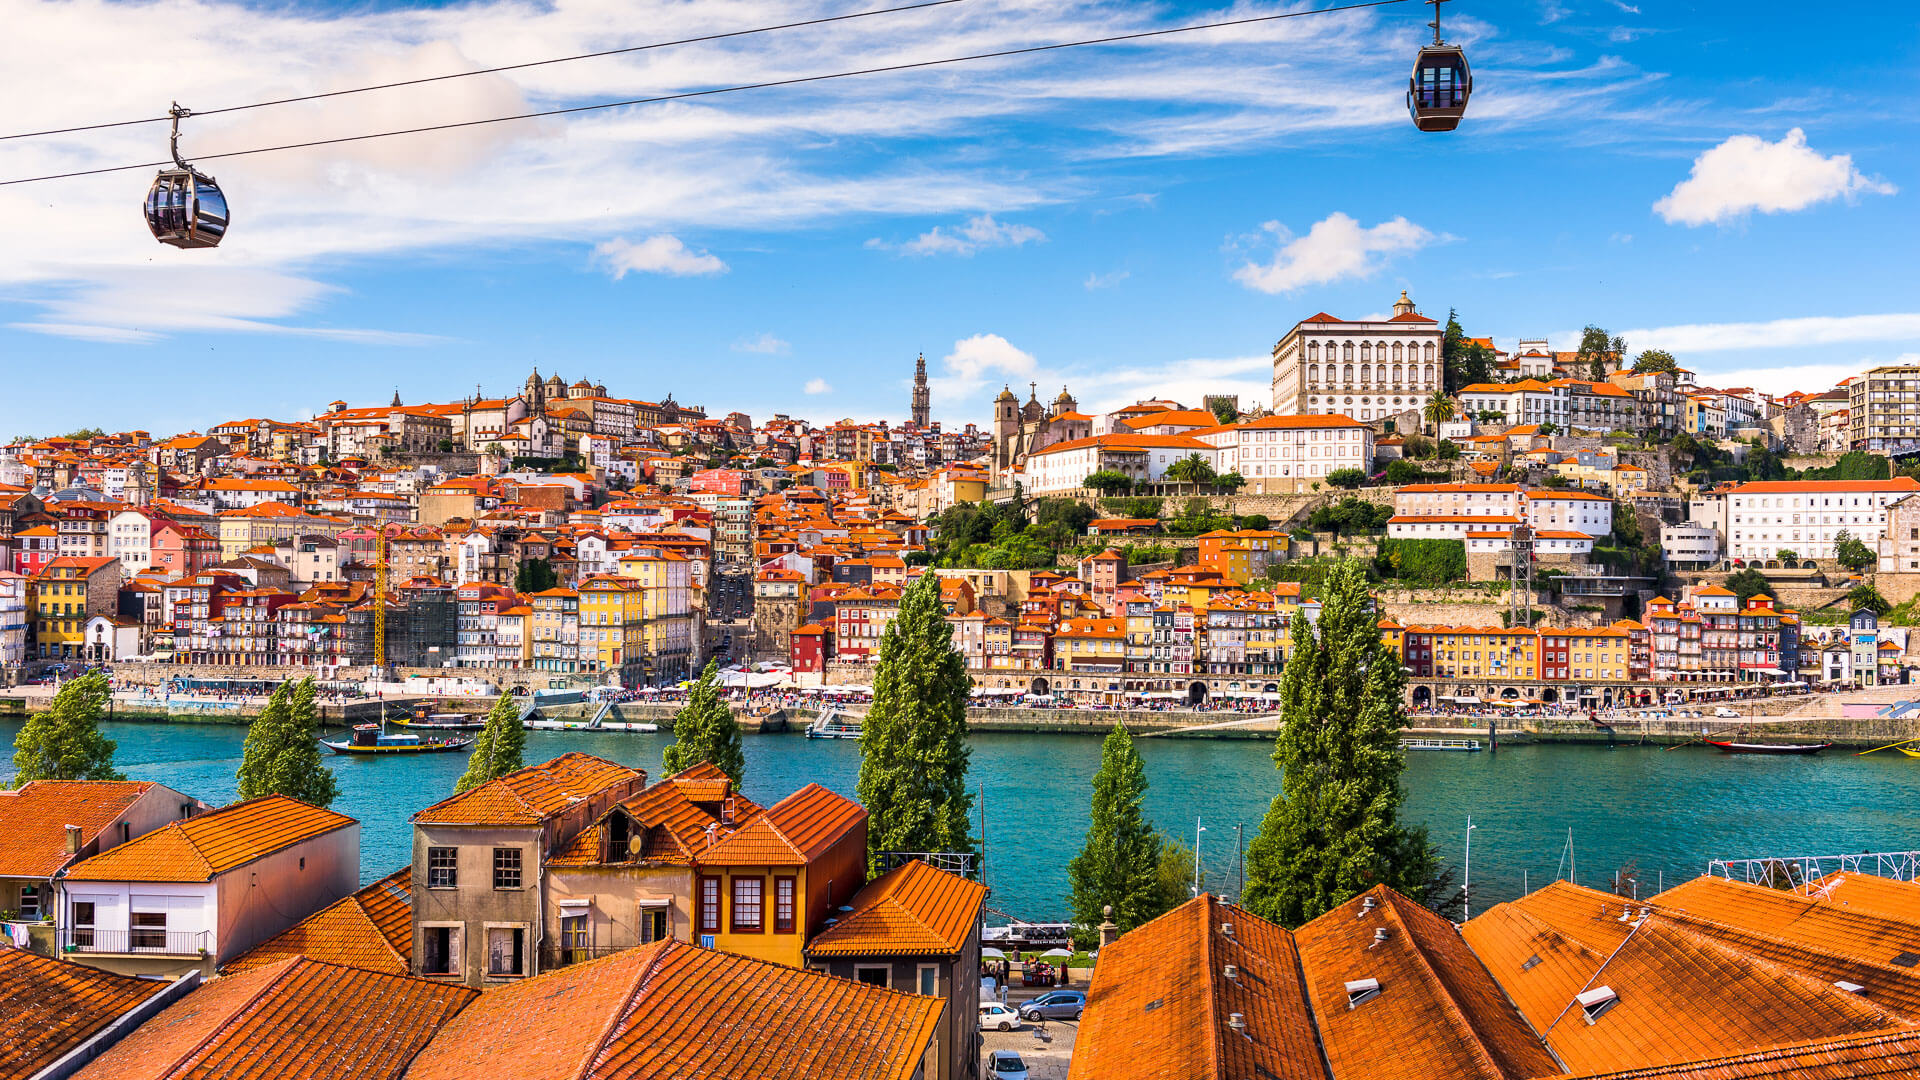 <p>Portugal, a <a href="https://www.gobankingrates.com/investing/real-estate/why-buying-vacation-home-may-be-easier-than-you-think/?utm_term=incontent_link_1&utm_campaign=1269648&utm_source=msn.com&utm_content=1&utm_medium=rss" rel="">favorite destination</a> for vacationers from all over the world, is home to white-sand beaches, historical landmarks and mouthwatering cuisine.</p> <p><strong>Read Next: <a href="https://www.gobankingrates.com/money/wealth/the-salary-a-single-person-needs-to-live-comfortably-in-hawaii/?utm_term=related_link_1&utm_campaign=1269648&utm_source=msn.com&utm_content=2&utm_medium=rss" rel="">Here's the Salary a Single Person Needs To Live Comfortably in Hawaii</a></strong></p> <p><strong>Find Out: <a href="https://www.gobankingrates.com/what-to-do-if-you-owe-back-taxes-to-the-irs-1808611/?utm_term=related_link_2&utm_campaign=1269648&utm_source=msn.com&utm_content=3&utm_medium=rss" rel="">Owe Money to the IRS? Most People Don't Realize They Should Do This One Thing</a></strong></p> <p>It beckons travelers with the promise of exciting experiences and the easy, tranquil charm its citizens are known for. Portugal's diversity caters to every traveler's taste, from Lisbon's busy streets to Porto's quieter bucolic charm, the Algarve's serene beauty and the Azores' unspoiled landscape.</p> <p>Whether you're getting acquainted with a <em>pastéis de nata</em> at a local bakery, enjoying a Fado performance in a traditional local tavern or exploring the geological wonders of Benagil Cave, a trip to Portugal is a love affair waiting to happen.</p> <p>Now, picture yourself owning a slice of Portuguese paradise to call your own -- a beautiful vacation home to retreat to, year after year. Investing in a Portuguese vacation property offers a personal haven in a country known worldwide for its hospitality and charm, and it can even be a smart financial move. </p> <p>Portugal's thriving real estate market, its enticing tax benefits and the potential for rental income may make the prospect of buying a vacation home here a financially sound decision. Keep reading to learn <a href="https://www.gobankingrates.com/investing/real-estate/myths-about-buying-vacation-home/?utm_term=incontent_link_2&utm_campaign=1269648&utm_source=msn.com&utm_content=4&utm_medium=rss" rel="">everything you need to know</a> about what it would take to buy your own Portuguese-paradise vacation property.</p>